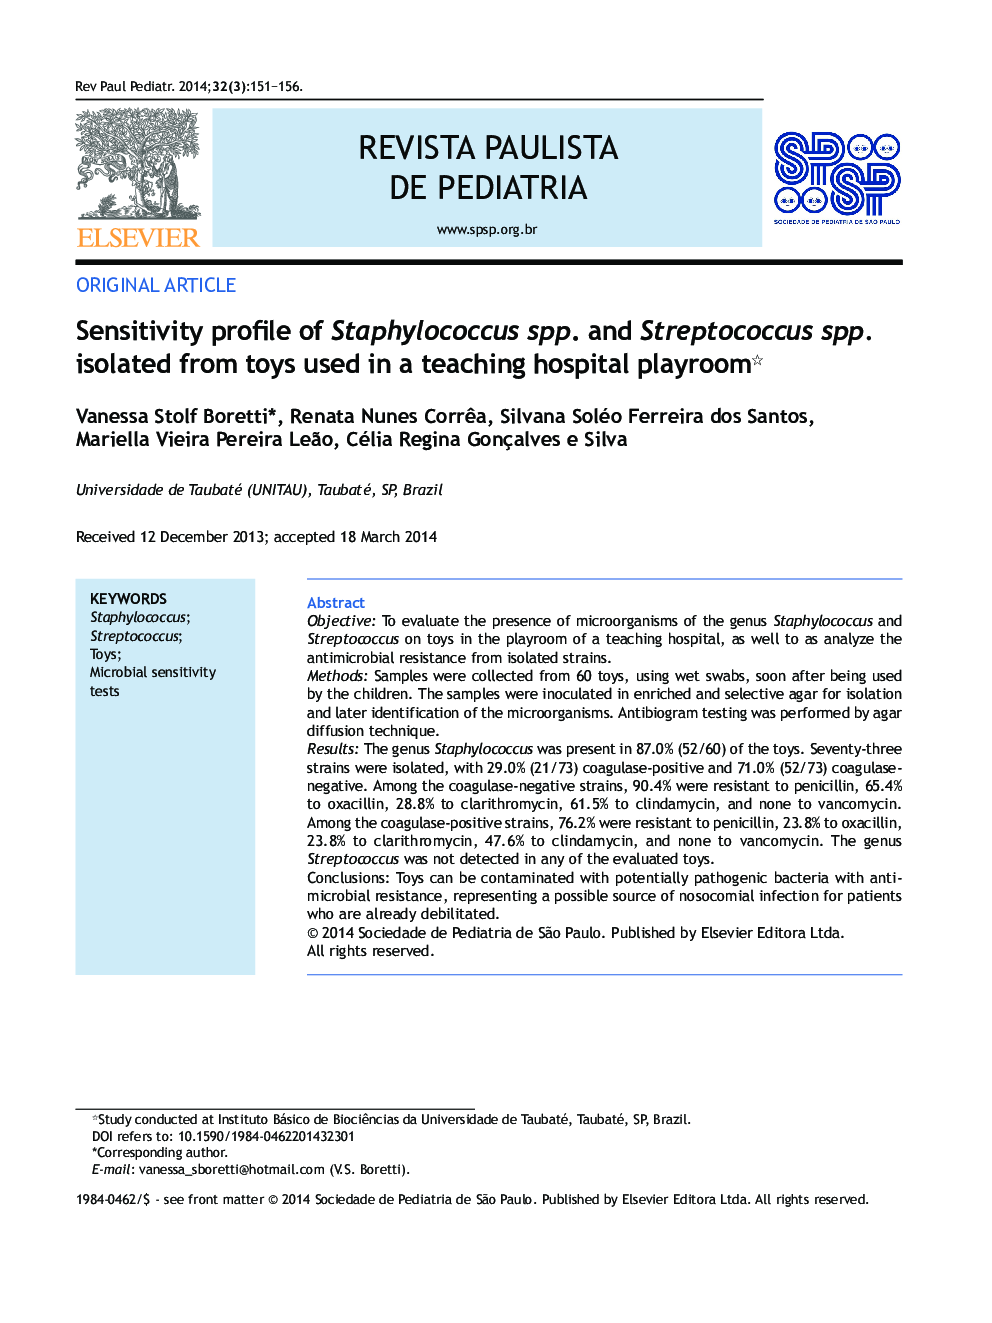 Sensitivity profile of Staphylococcus spp. and Streptococcus spp. isolated from toys used in a teaching hospital playroom *